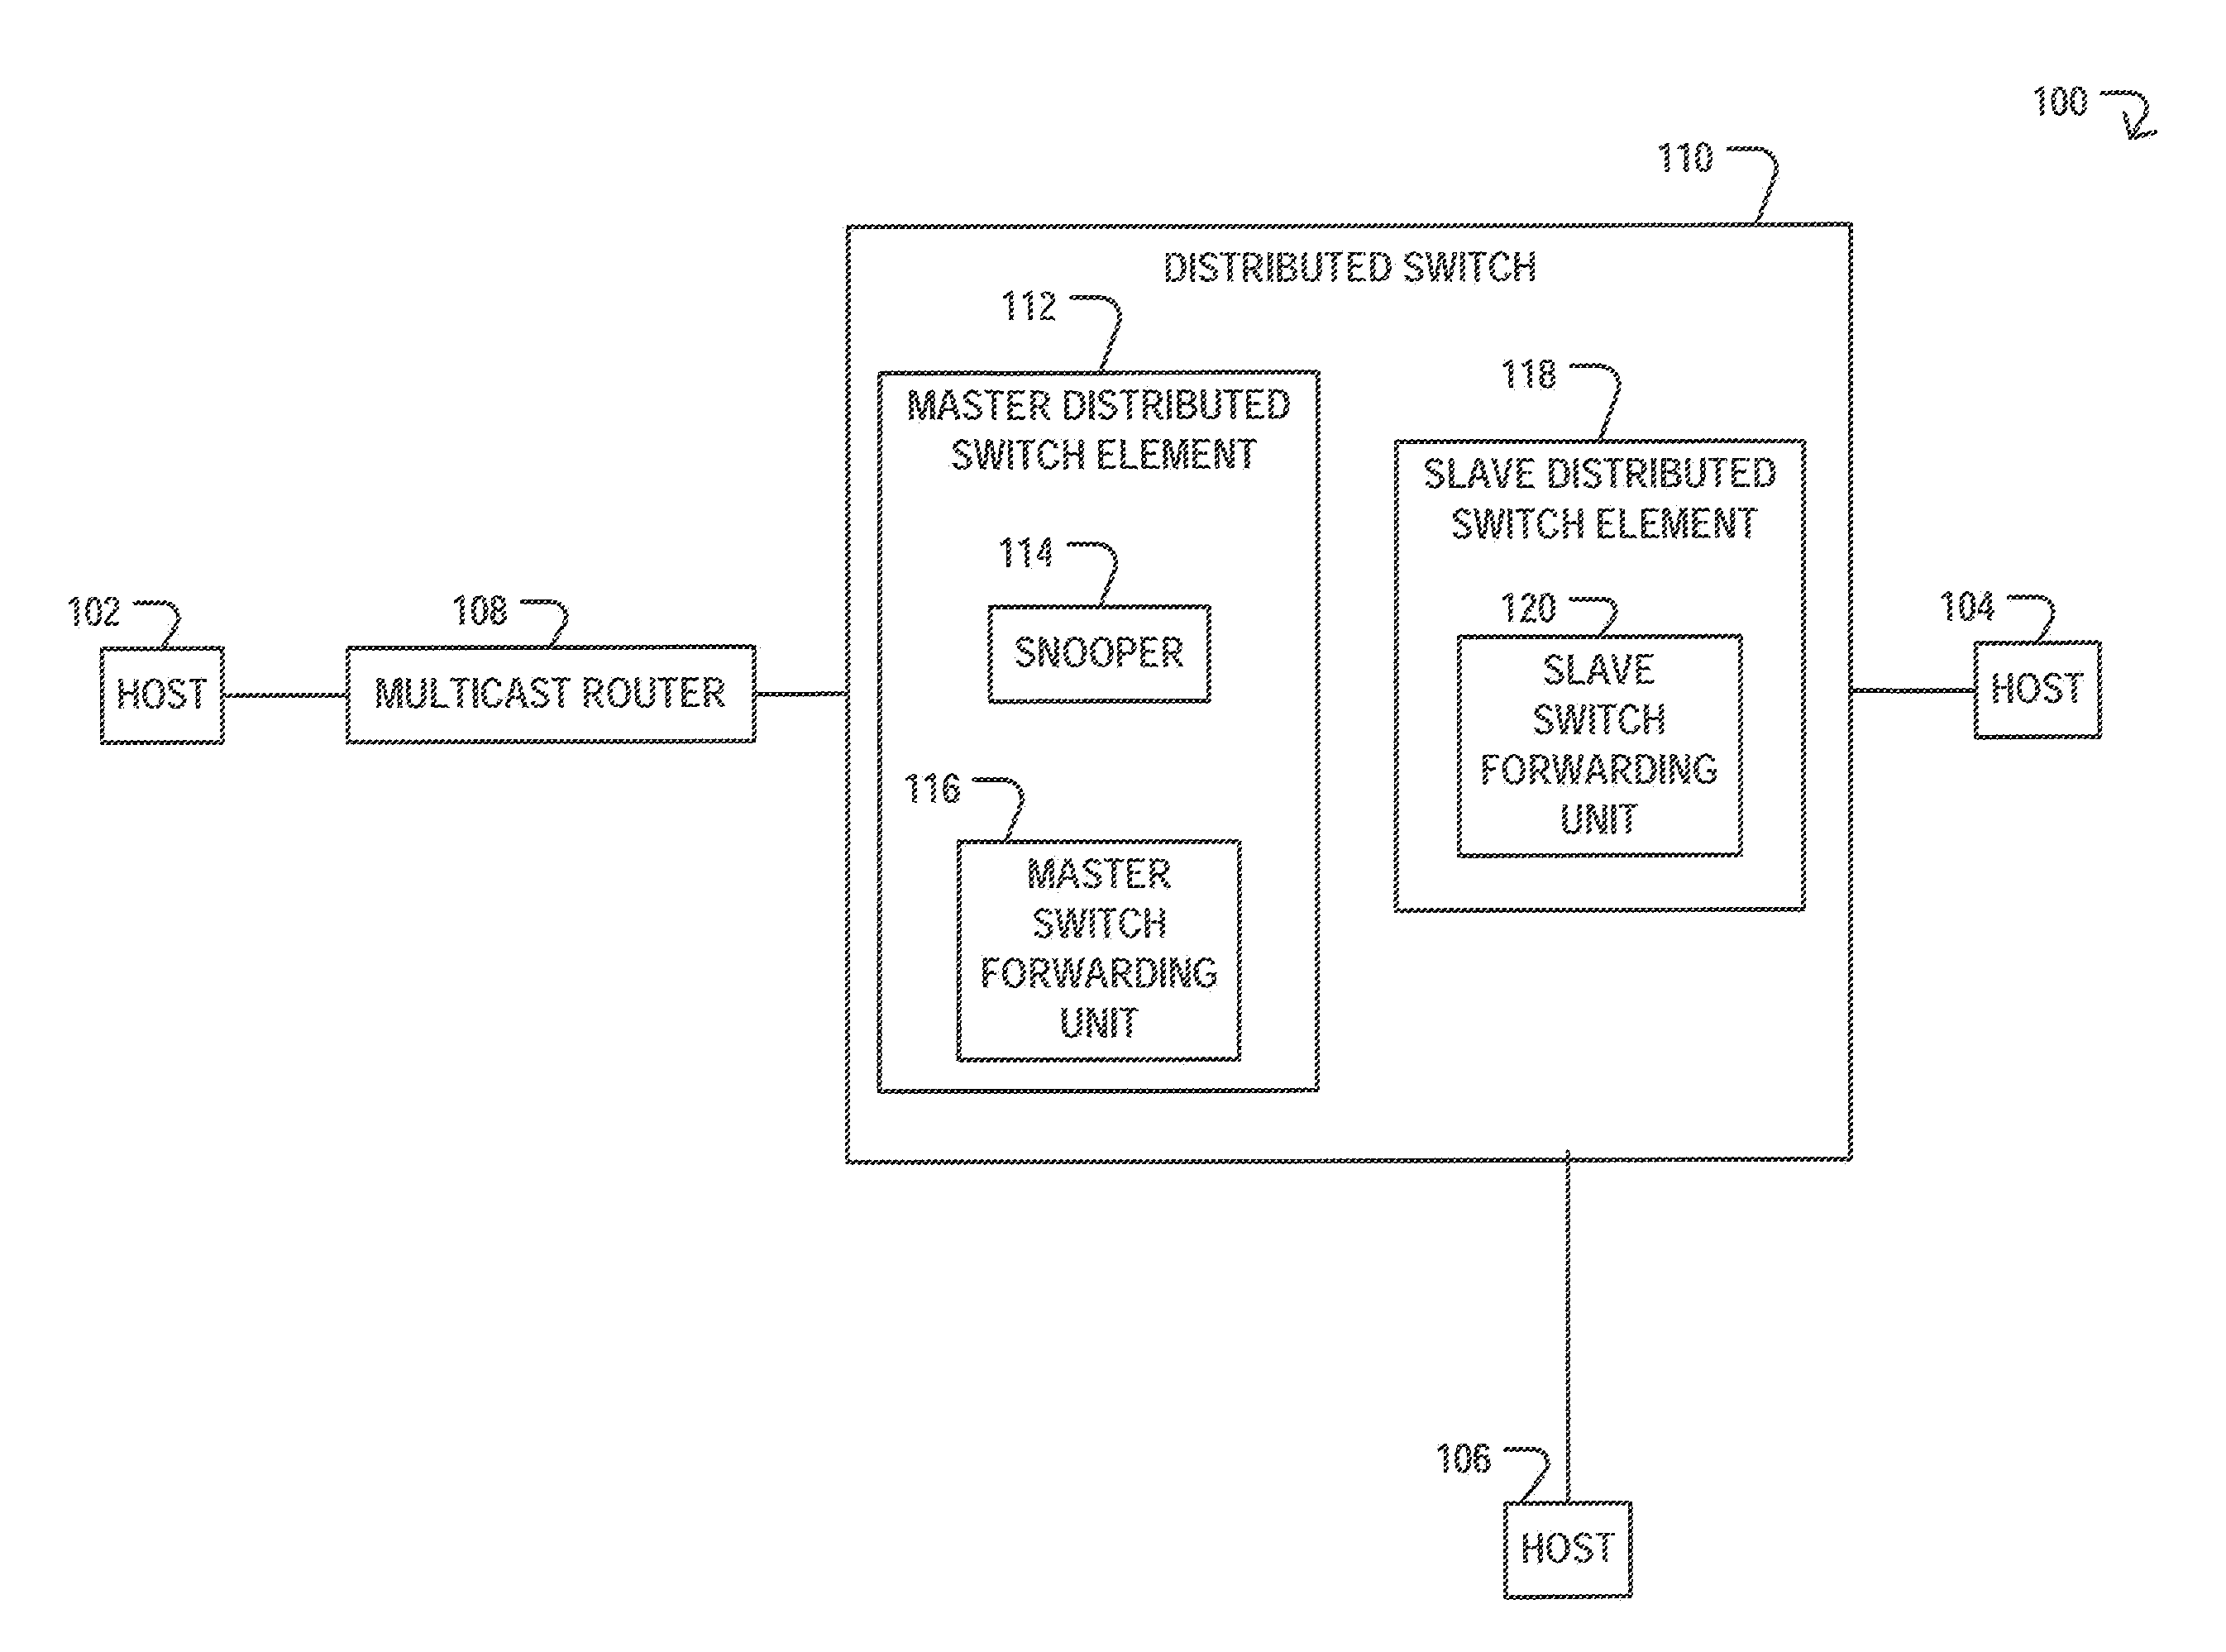 Managing a global forwarding table in a distributed switch